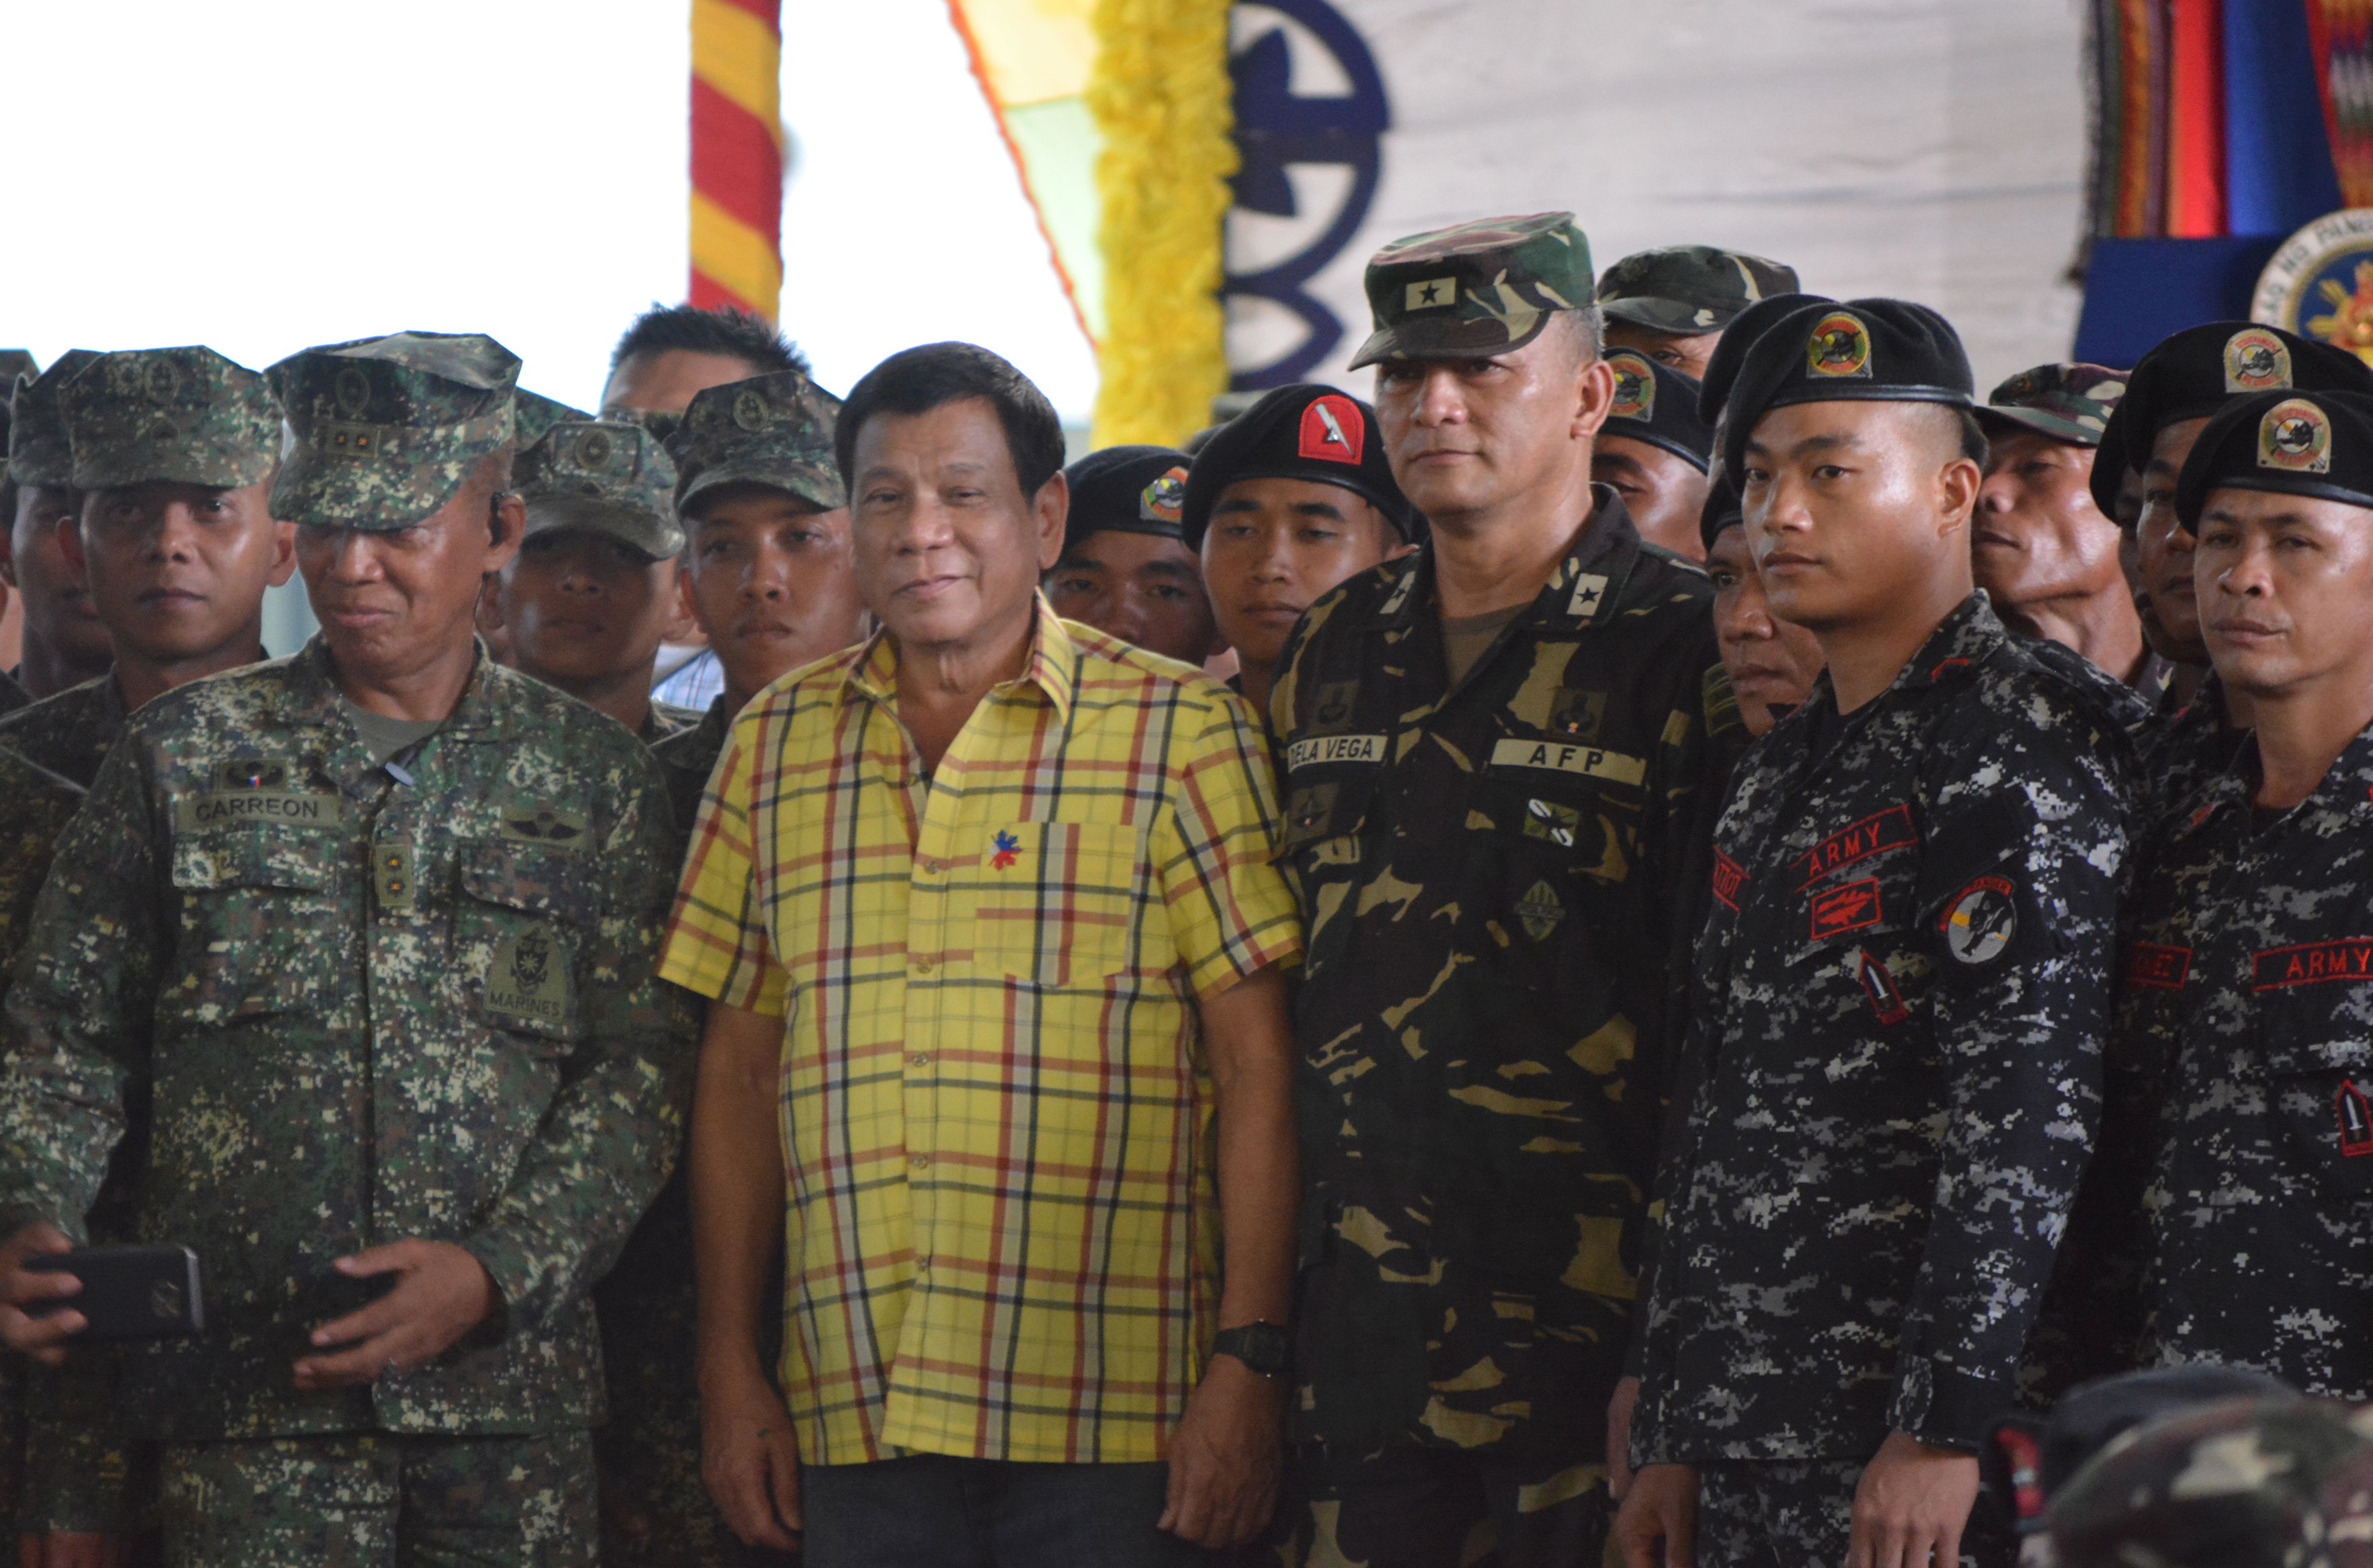 Philippine President Rodrigo Duterte, center left, poses with military personnel during a visit to a military camp in the Philippine town of Jolo, Sulu province, in the southern island of Mindanao, on Aug. 12, 2016 (STR—AFP/Getty Images)